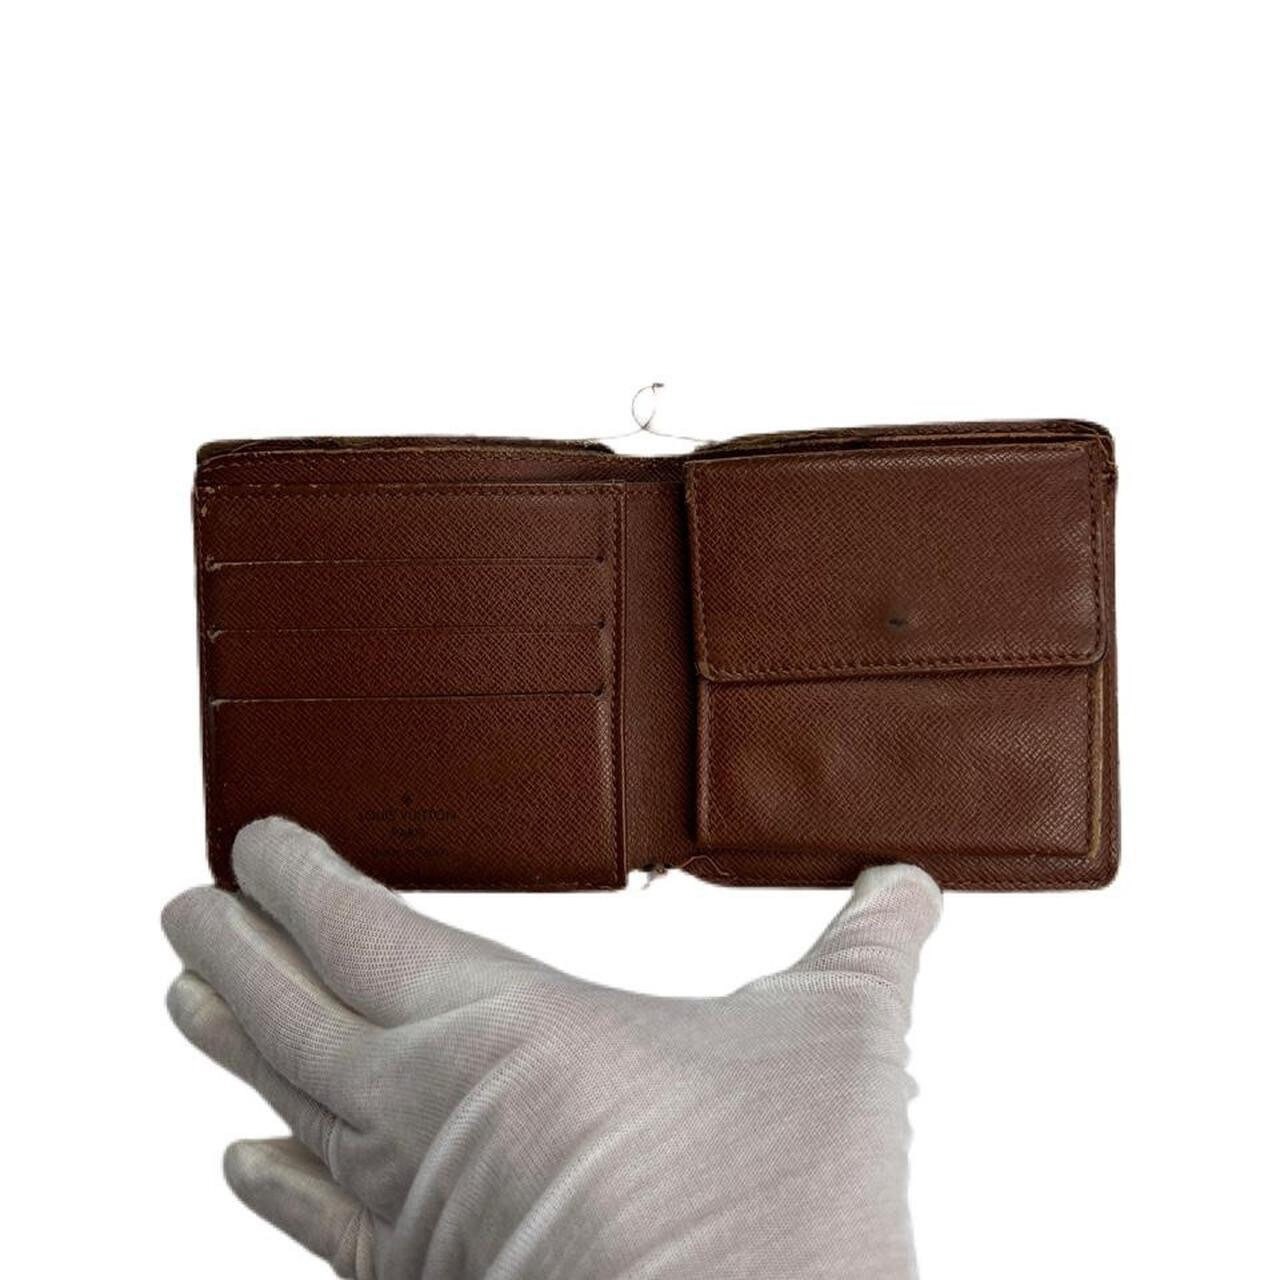 Buy SALE Ultra Rare Vintage Authentic LOUIS VUITTON Euro Wallet Online in  India 